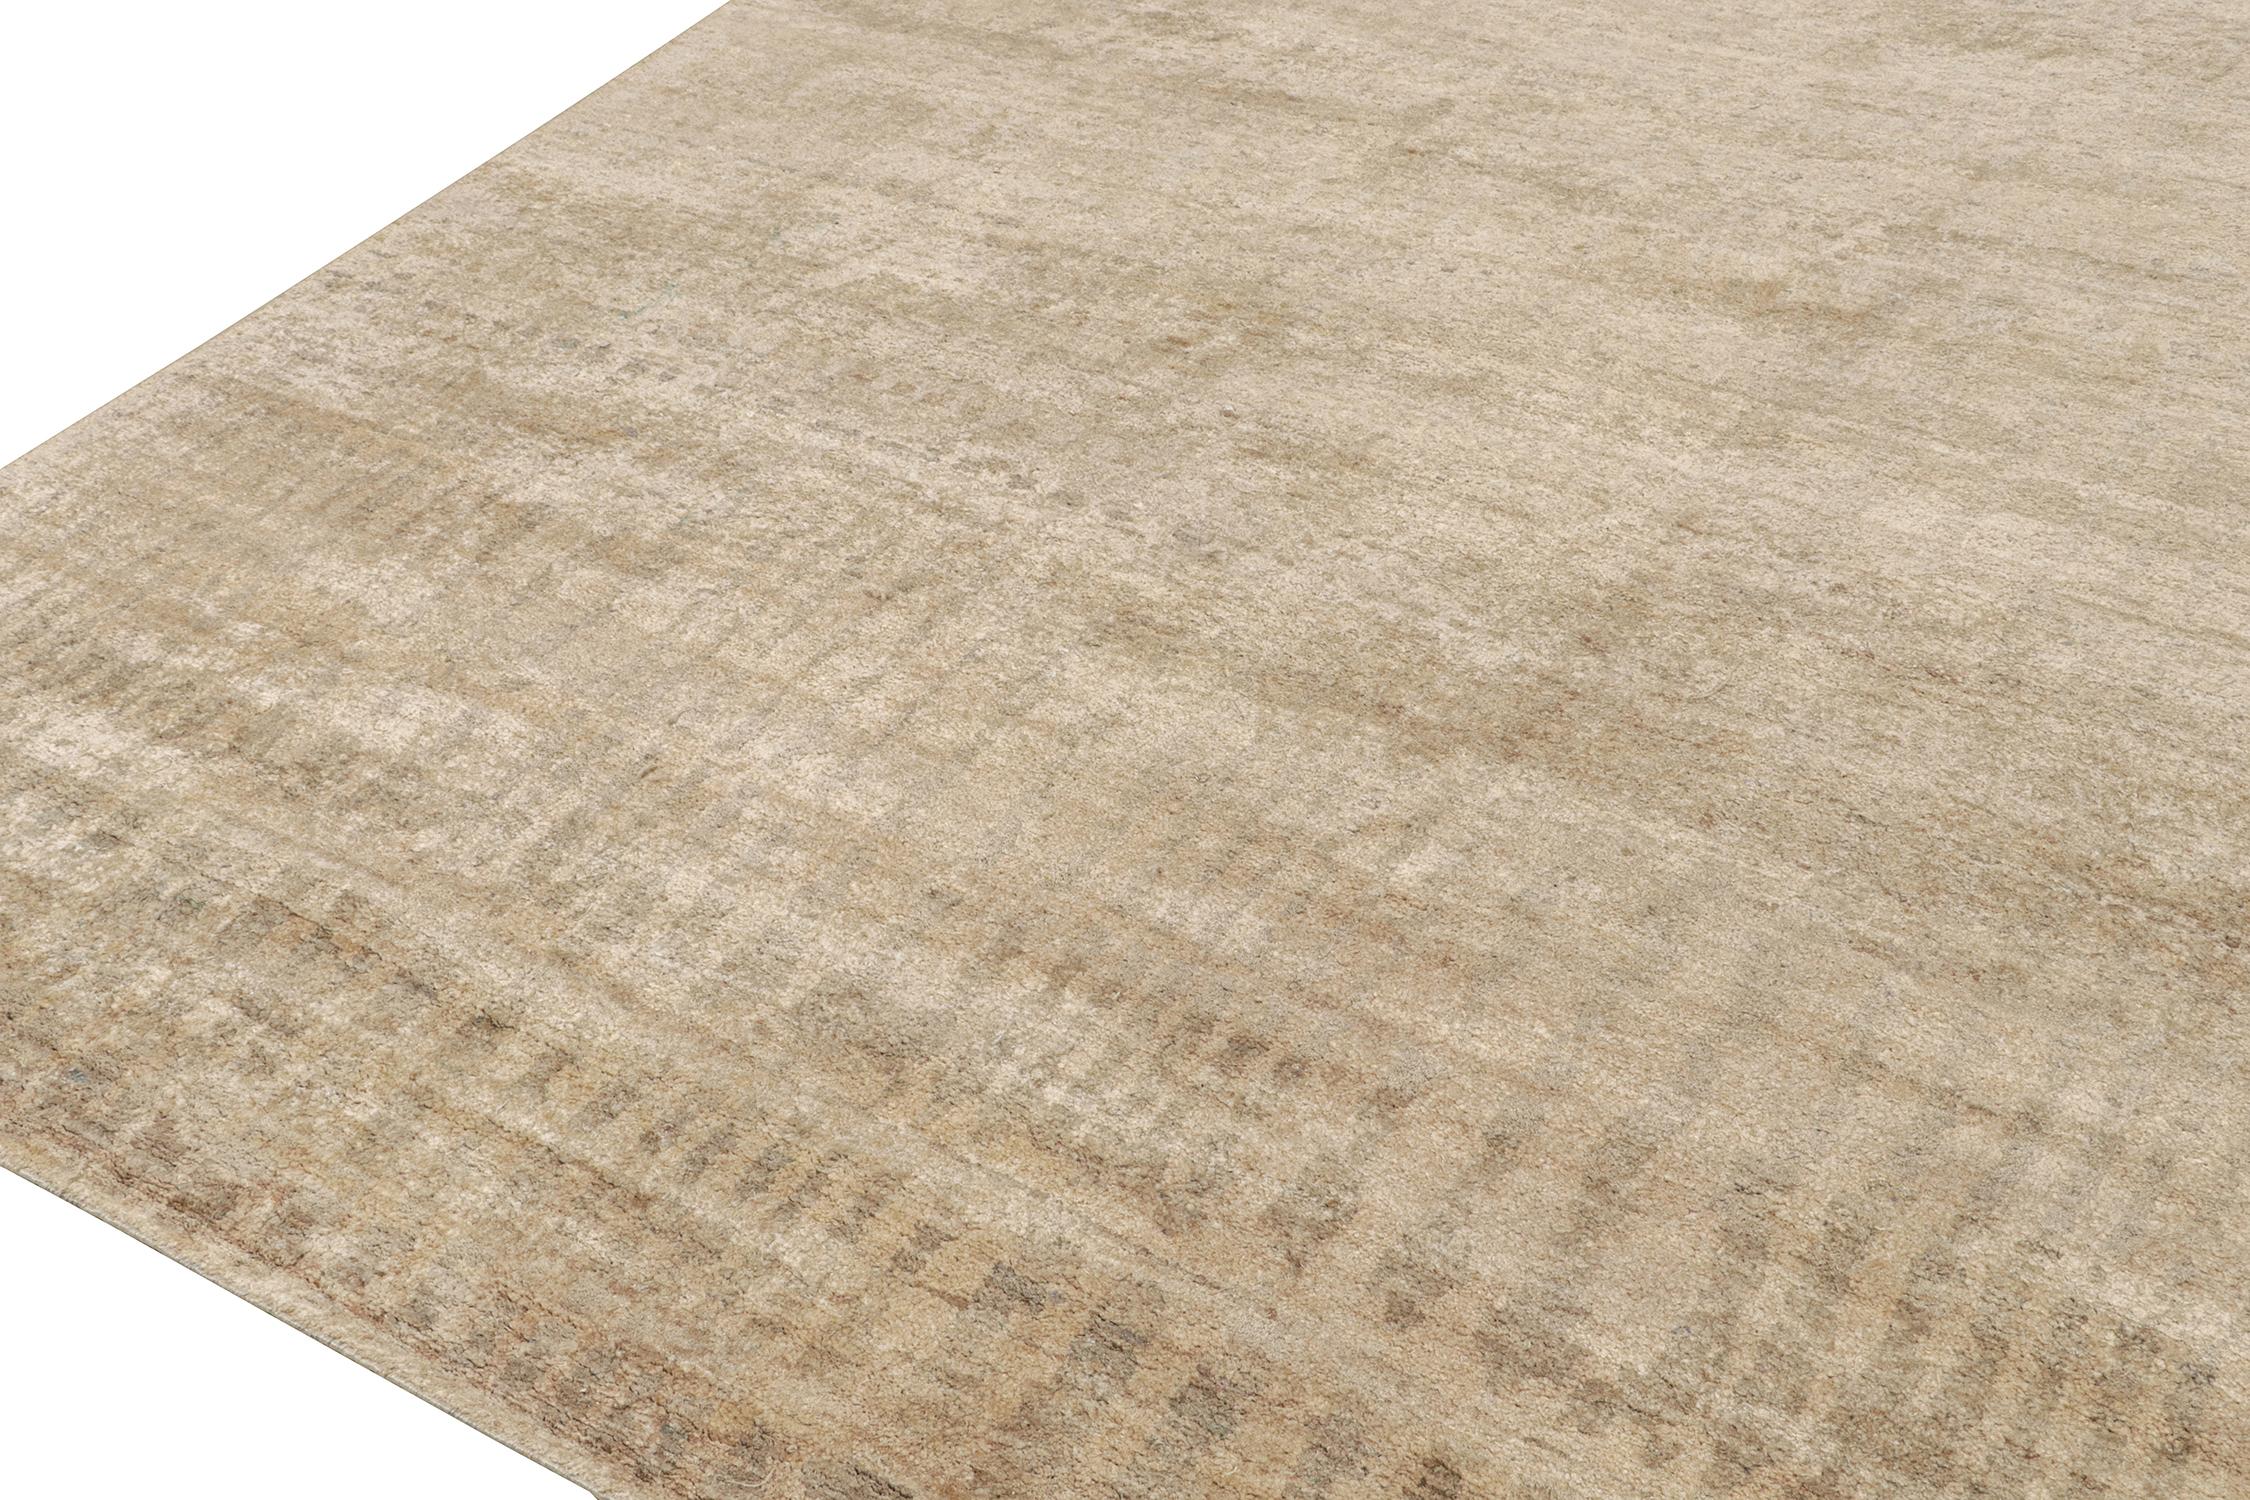 Hand-Knotted Rug & Kilim’s Contemporary Rug in Beige-Brown Tone-on-Tone Striae For Sale